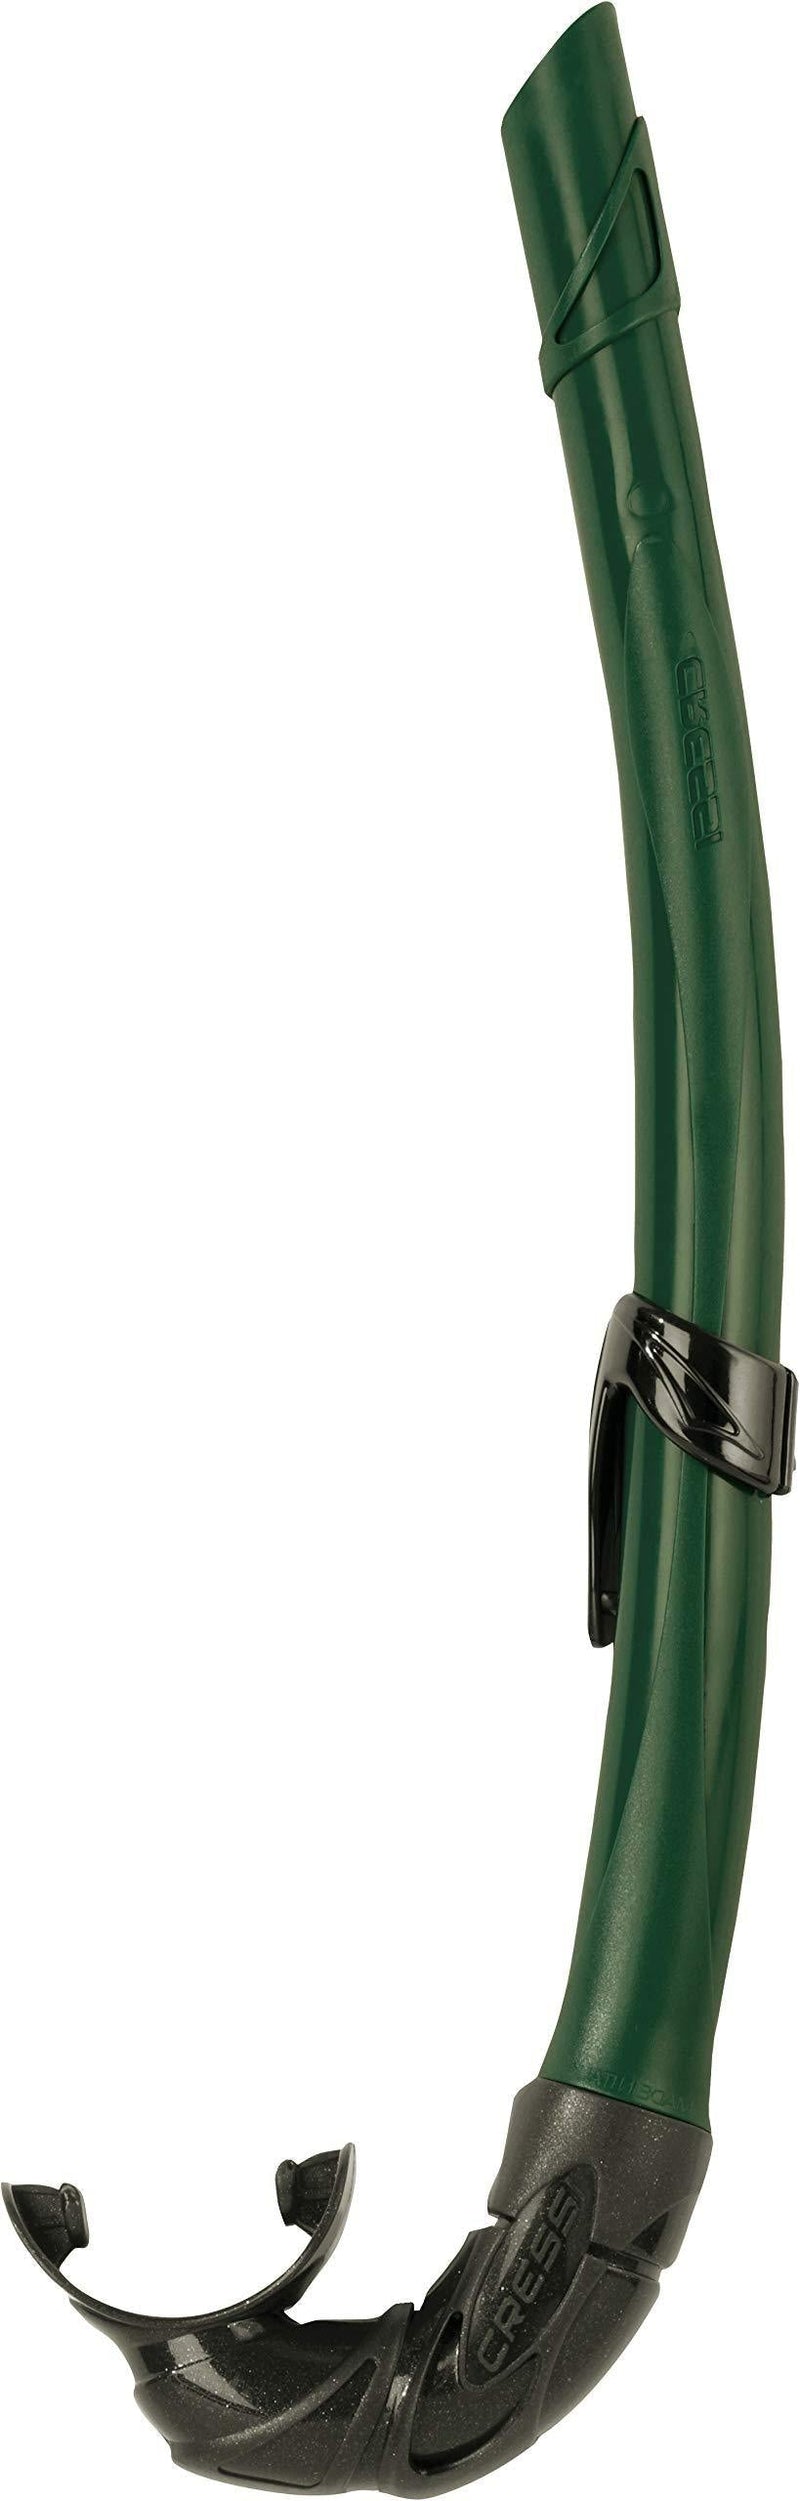 [AUSTRALIA] - Cressi Corsica, Flexible Rubber Snorkel for Scuba Diving, Freediving and Spearfishing - Solid and Camouflage colors | made in Italy Green 